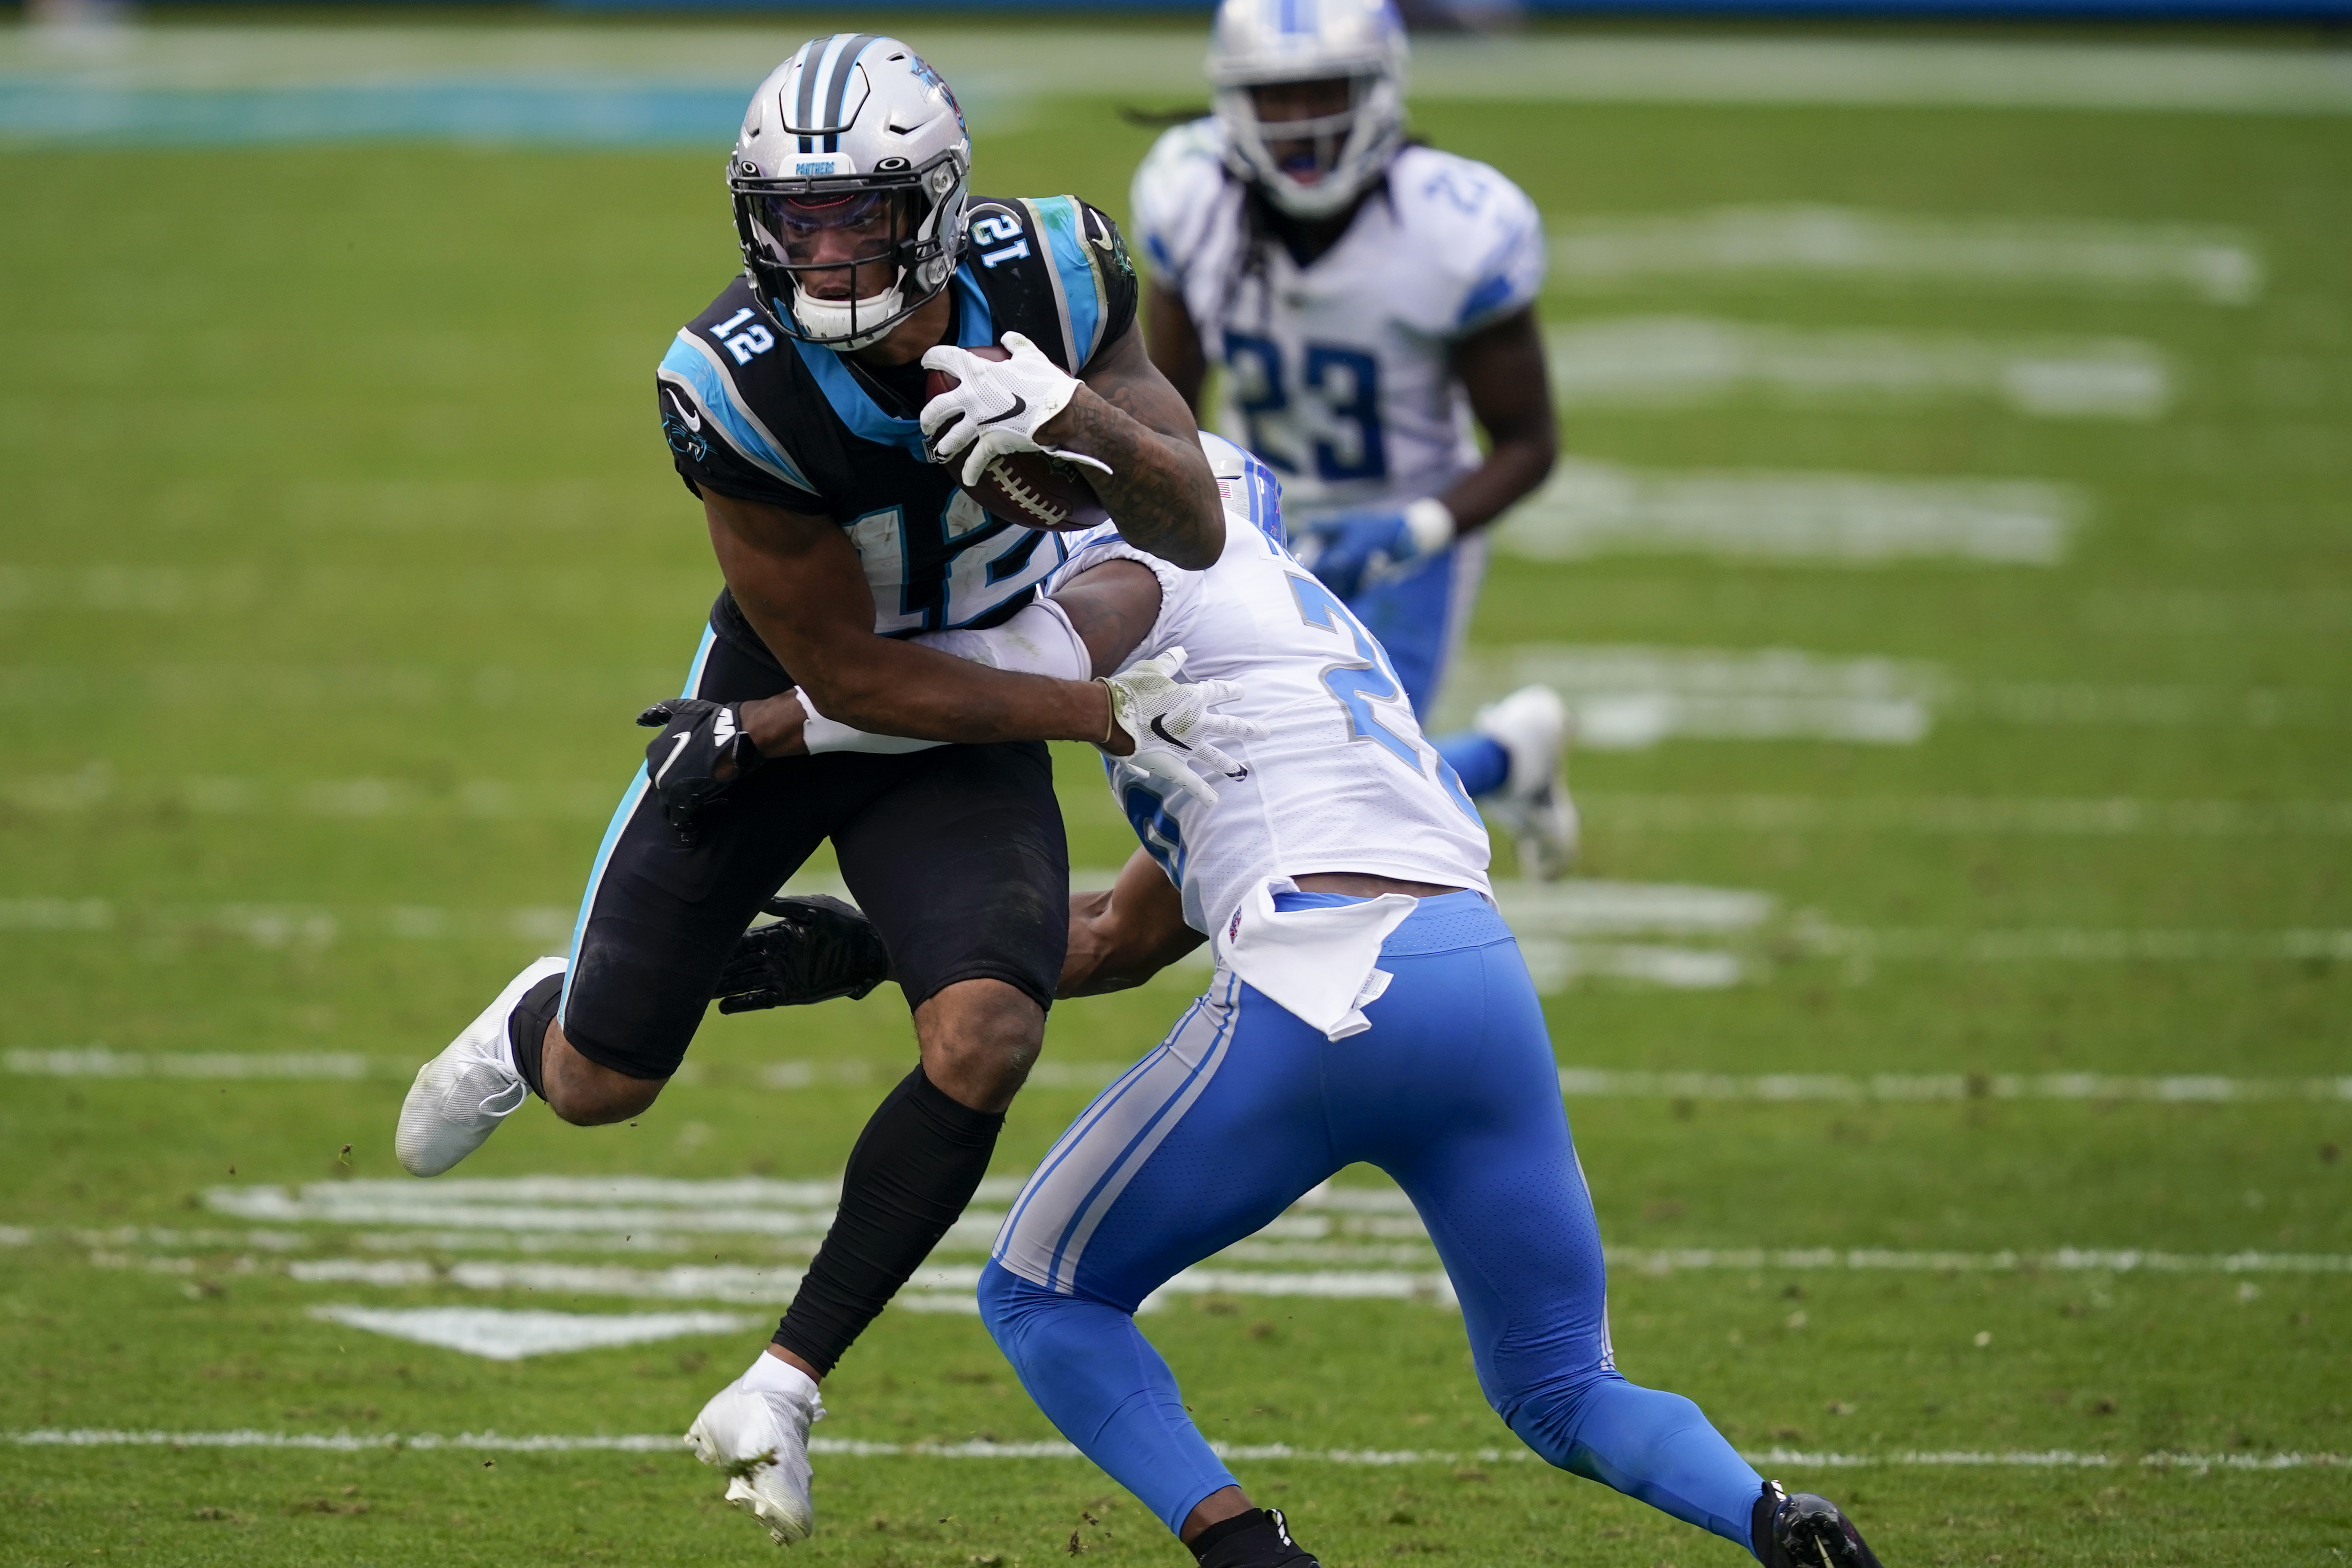 Walker wins first NFL start as Panthers blank Lions 20-0